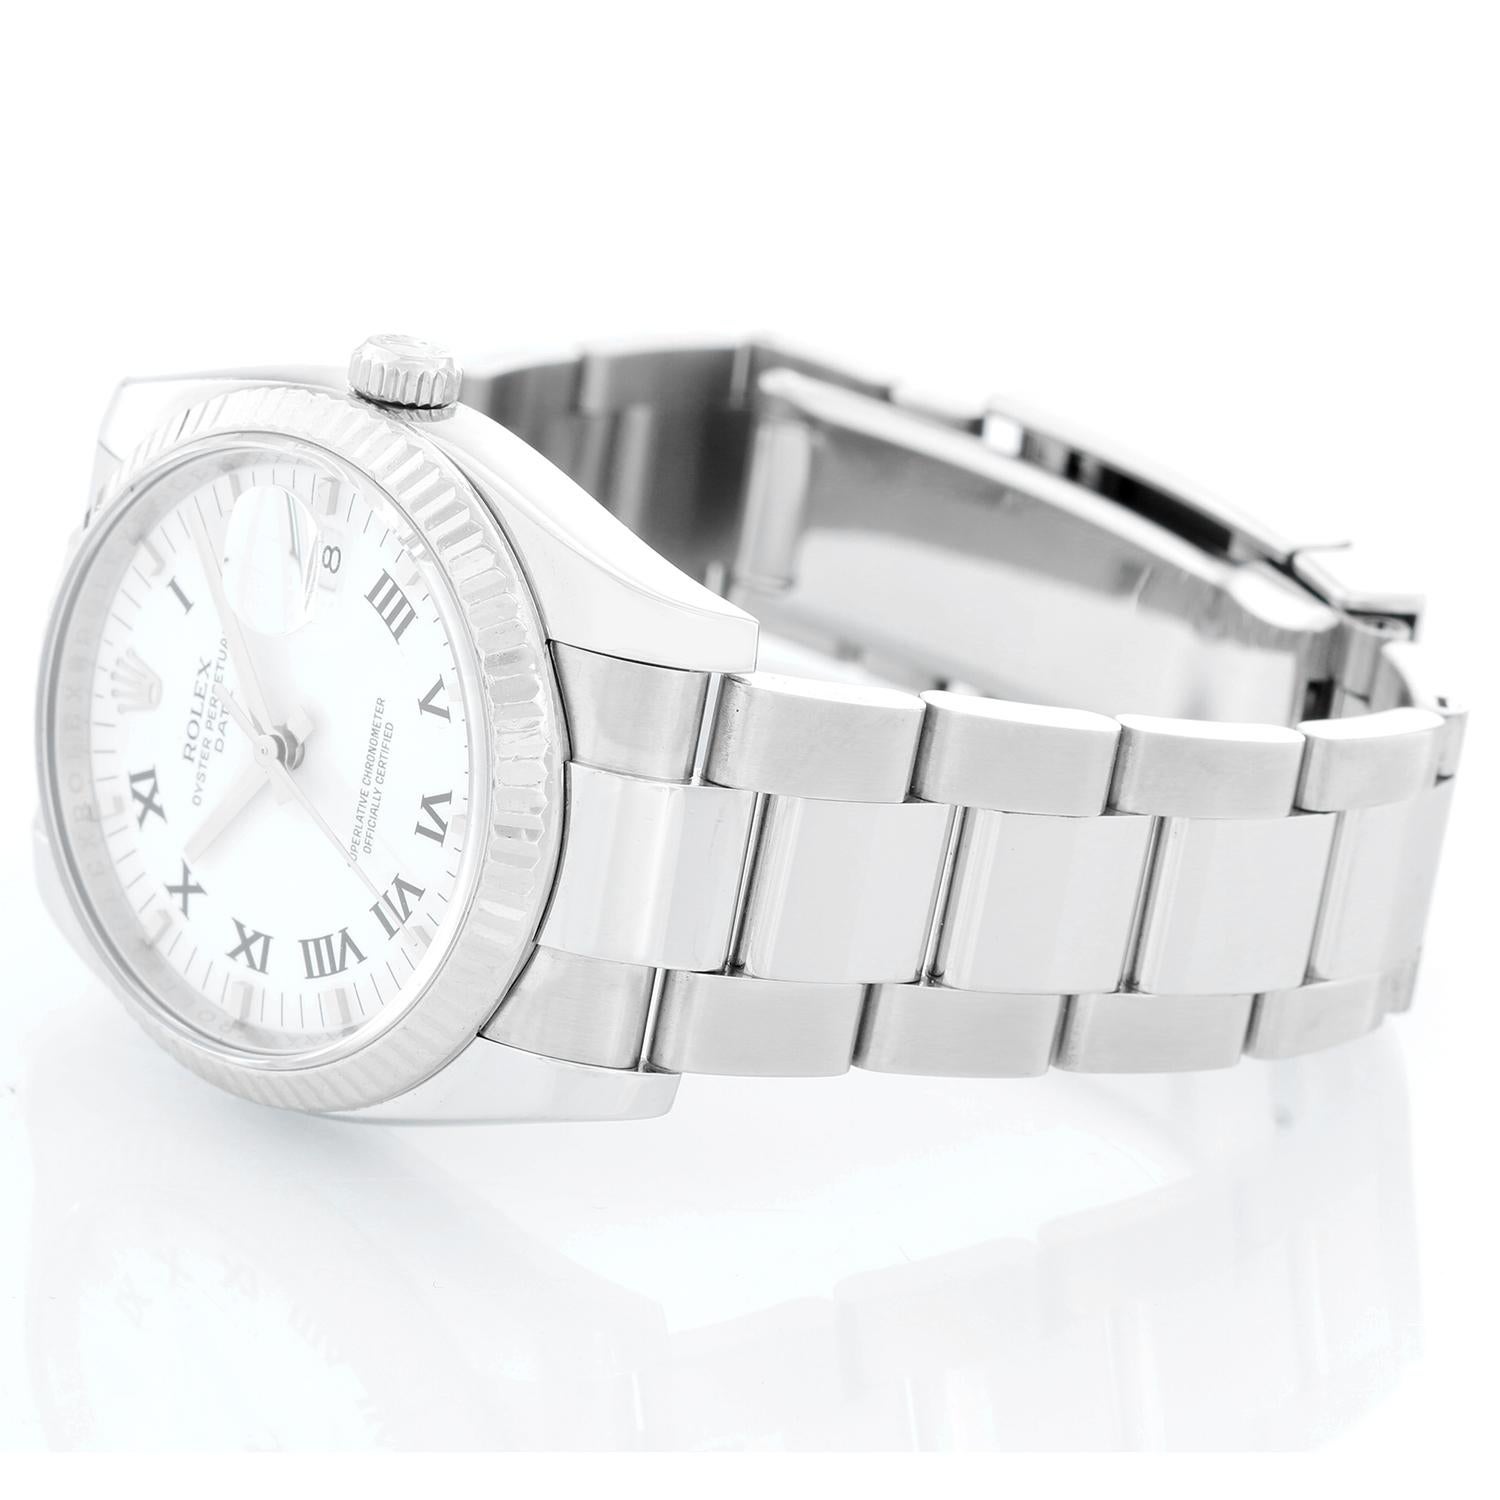 Rolex Date Men's Stainless Steel Watch 115234 - Automatic winding, 31 jewels, Quickset, sapphire crystal. Stainless steel case with 18k white gold fluted bezel ( 34 mm). White dial with roman numerals . Stainless steel Oyster bracelet. Pre-owned